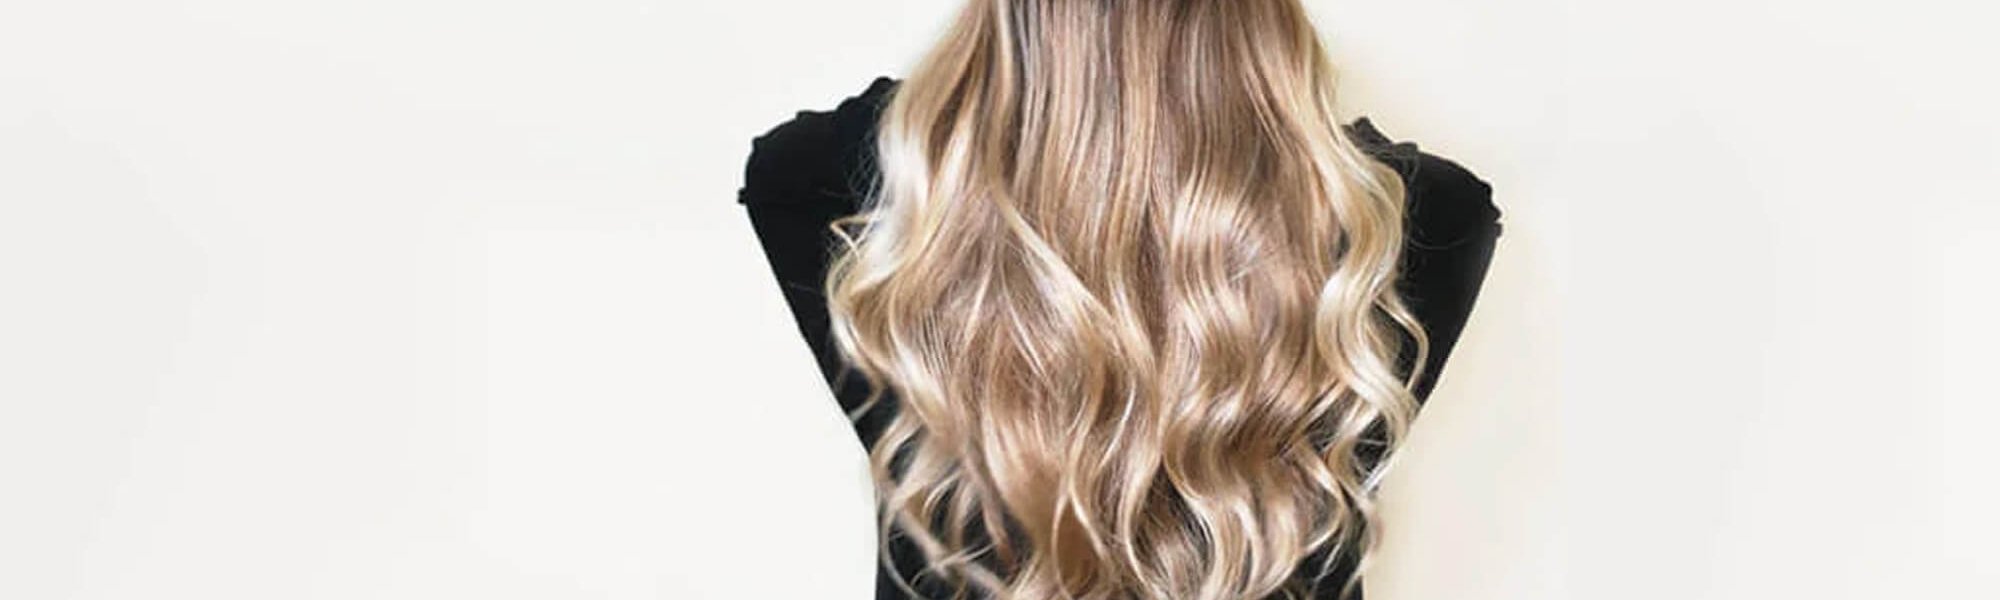 How To Go Lighter Without Bleaching At Home